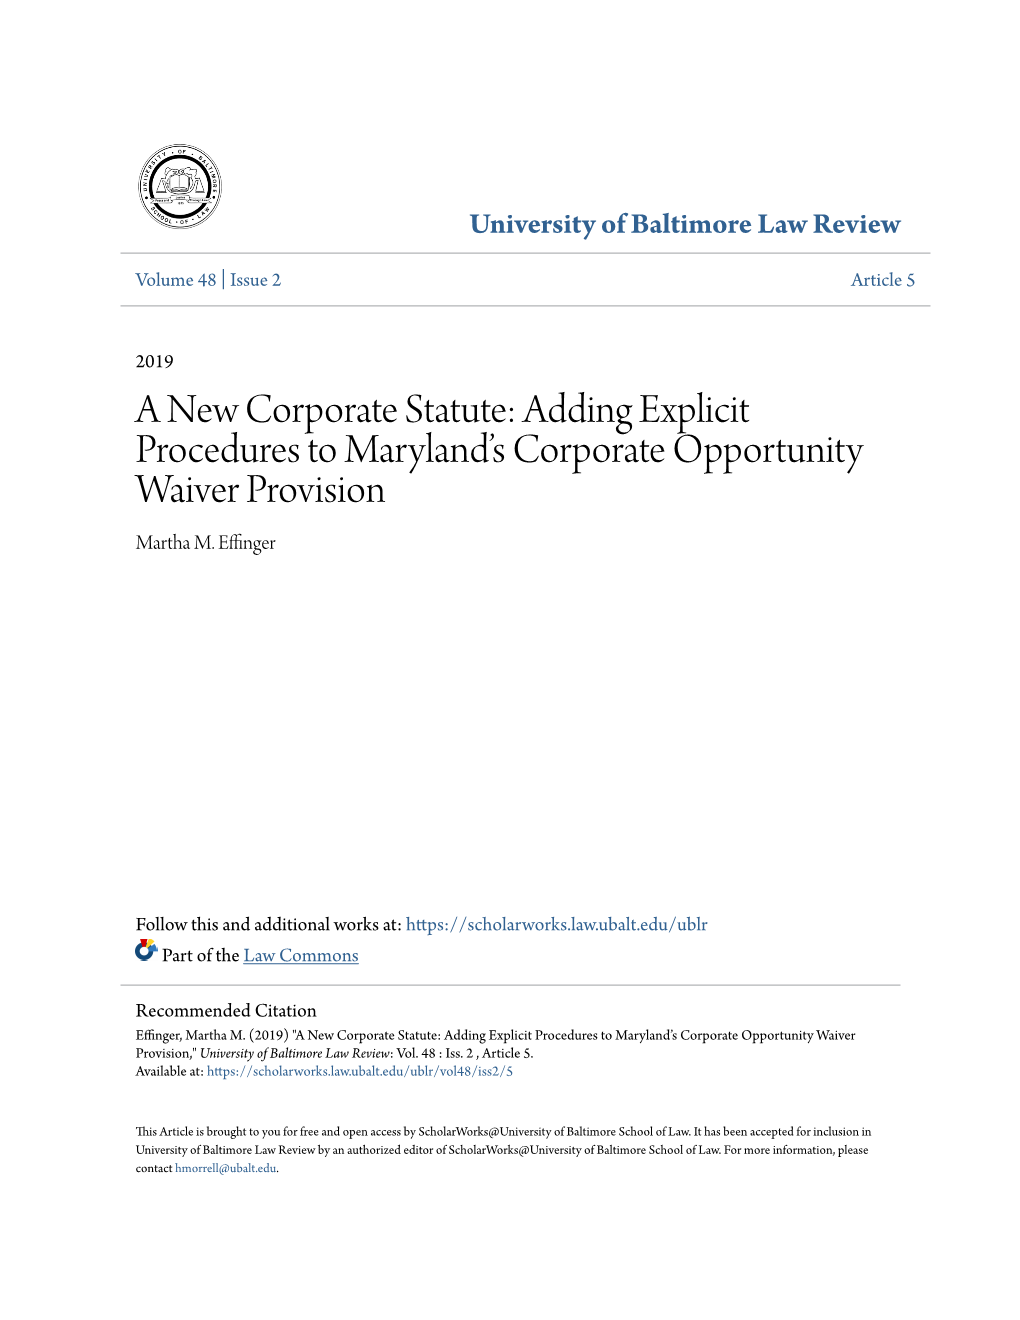 Adding Explicit Procedures to Maryland's Corporate Opportunity